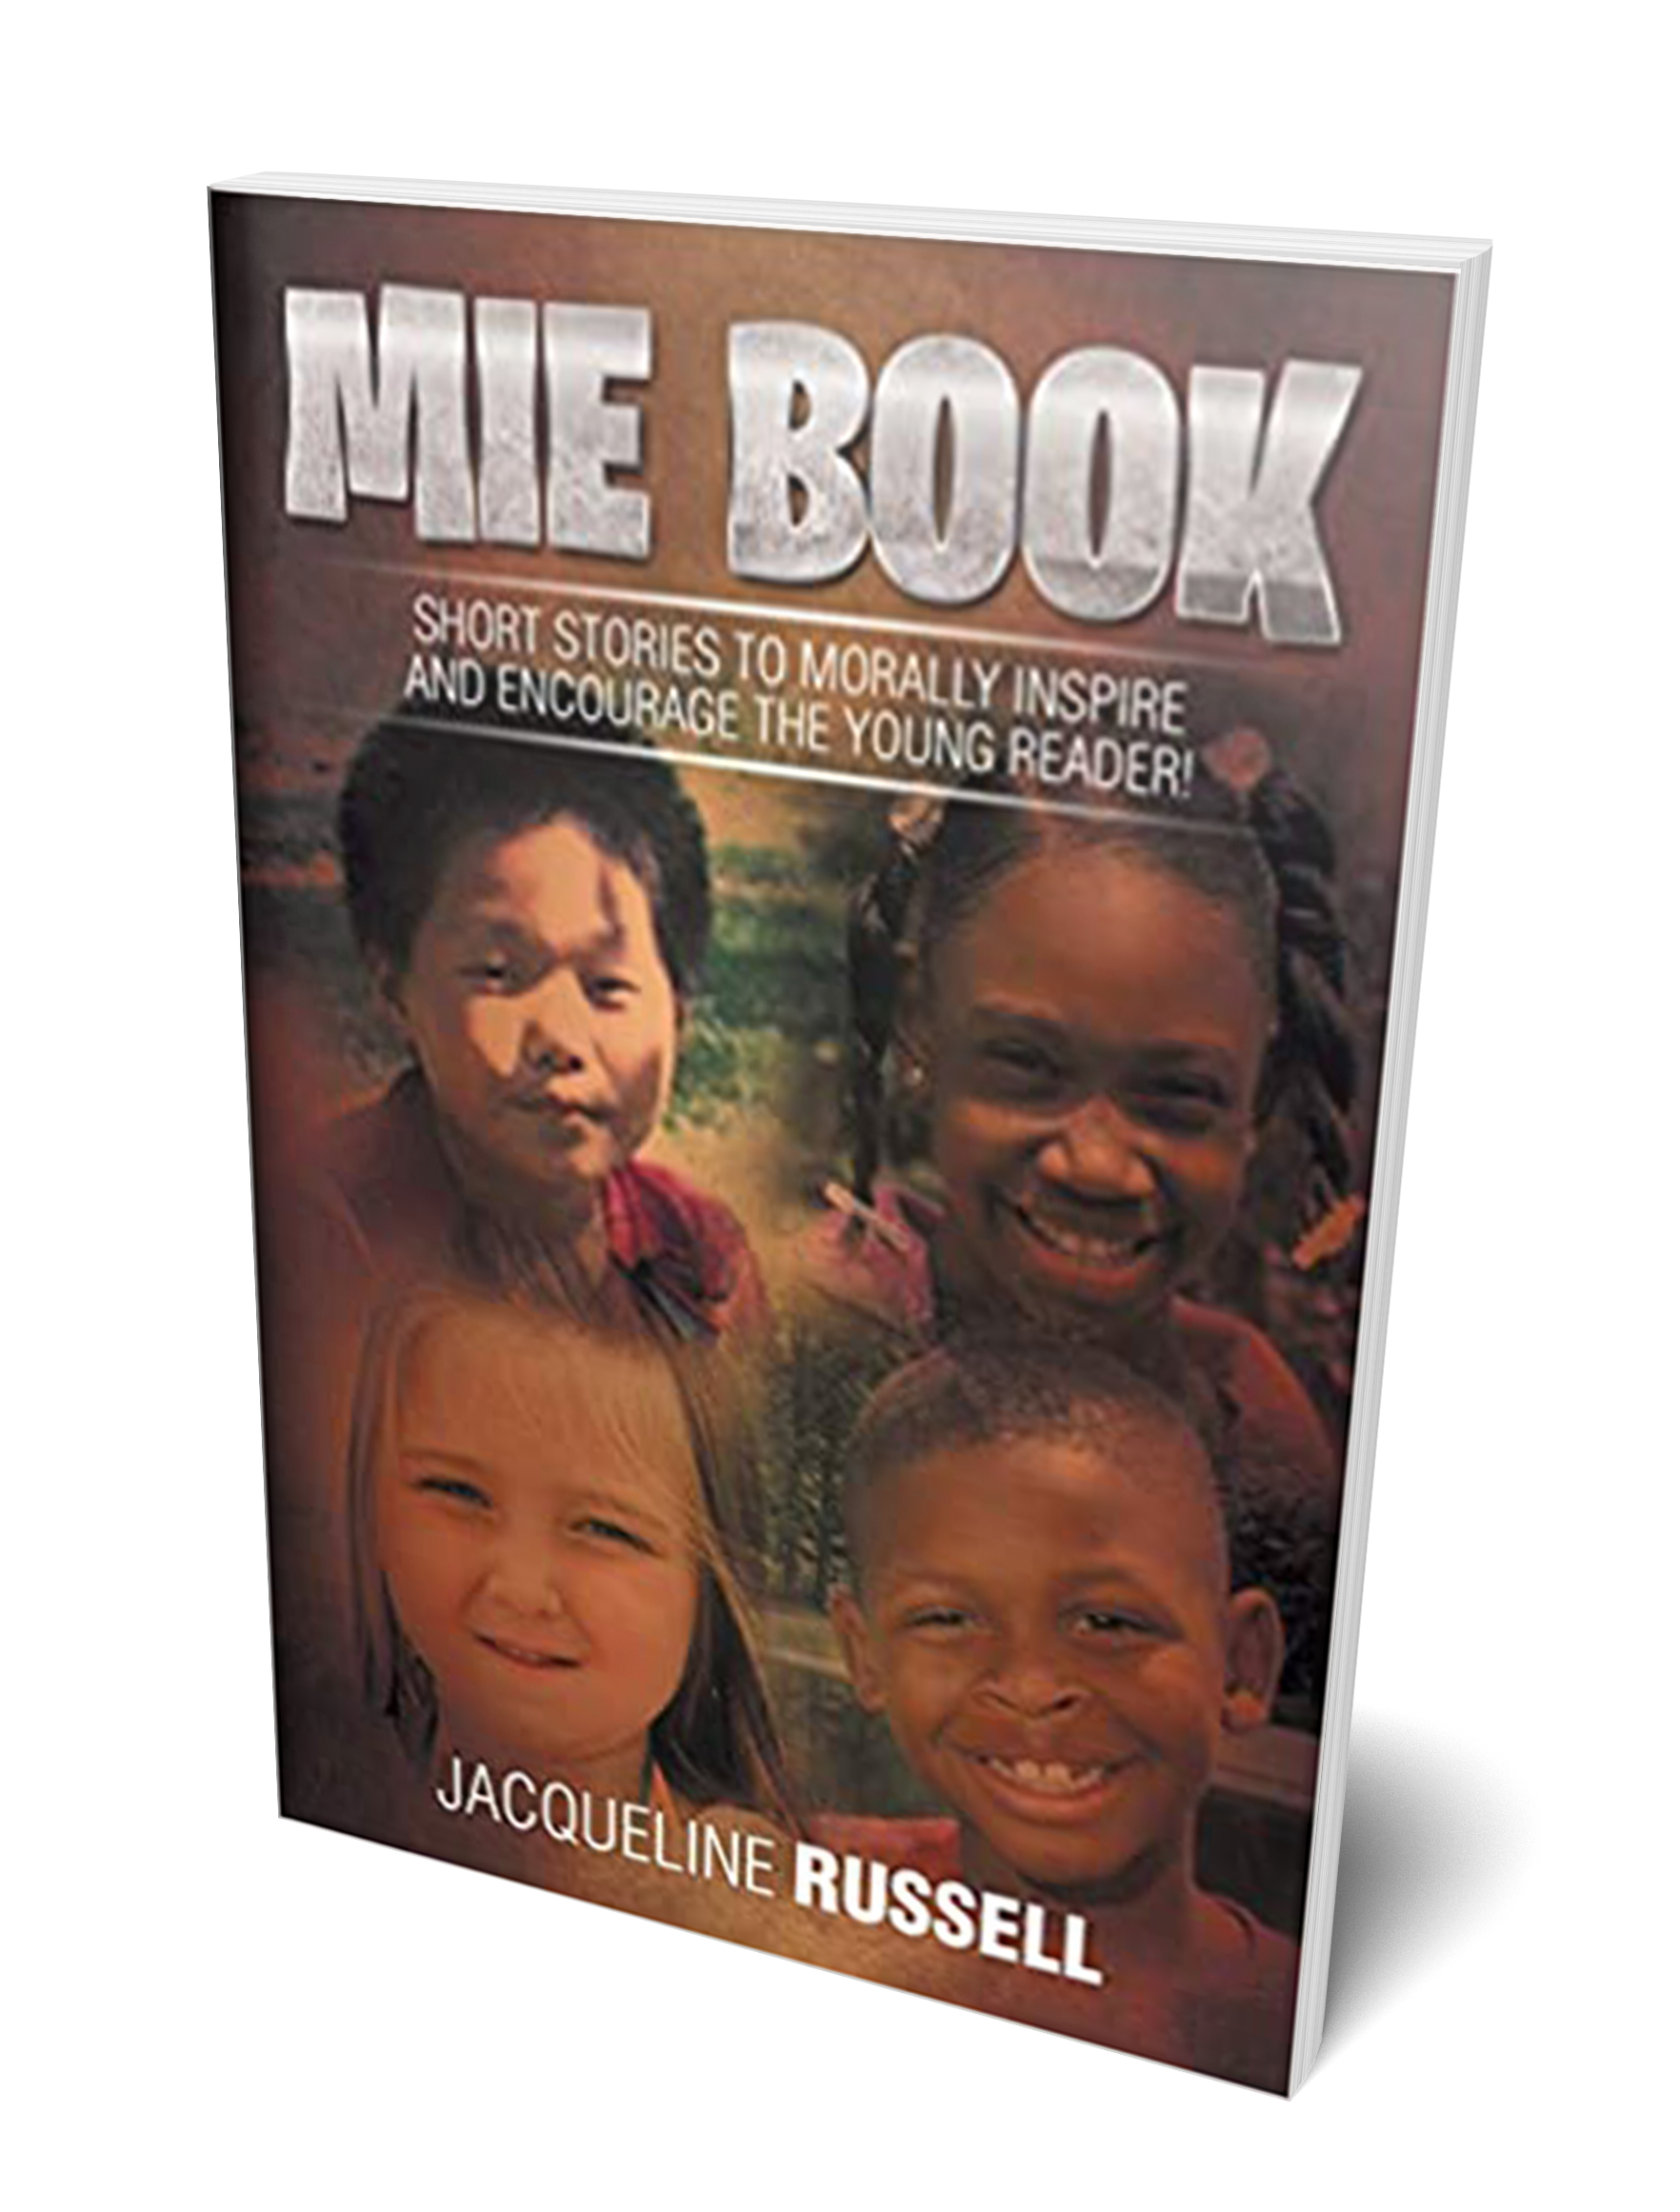 Mie Book: Short Stories to Morally Inspire and Encourage the Young Reader!